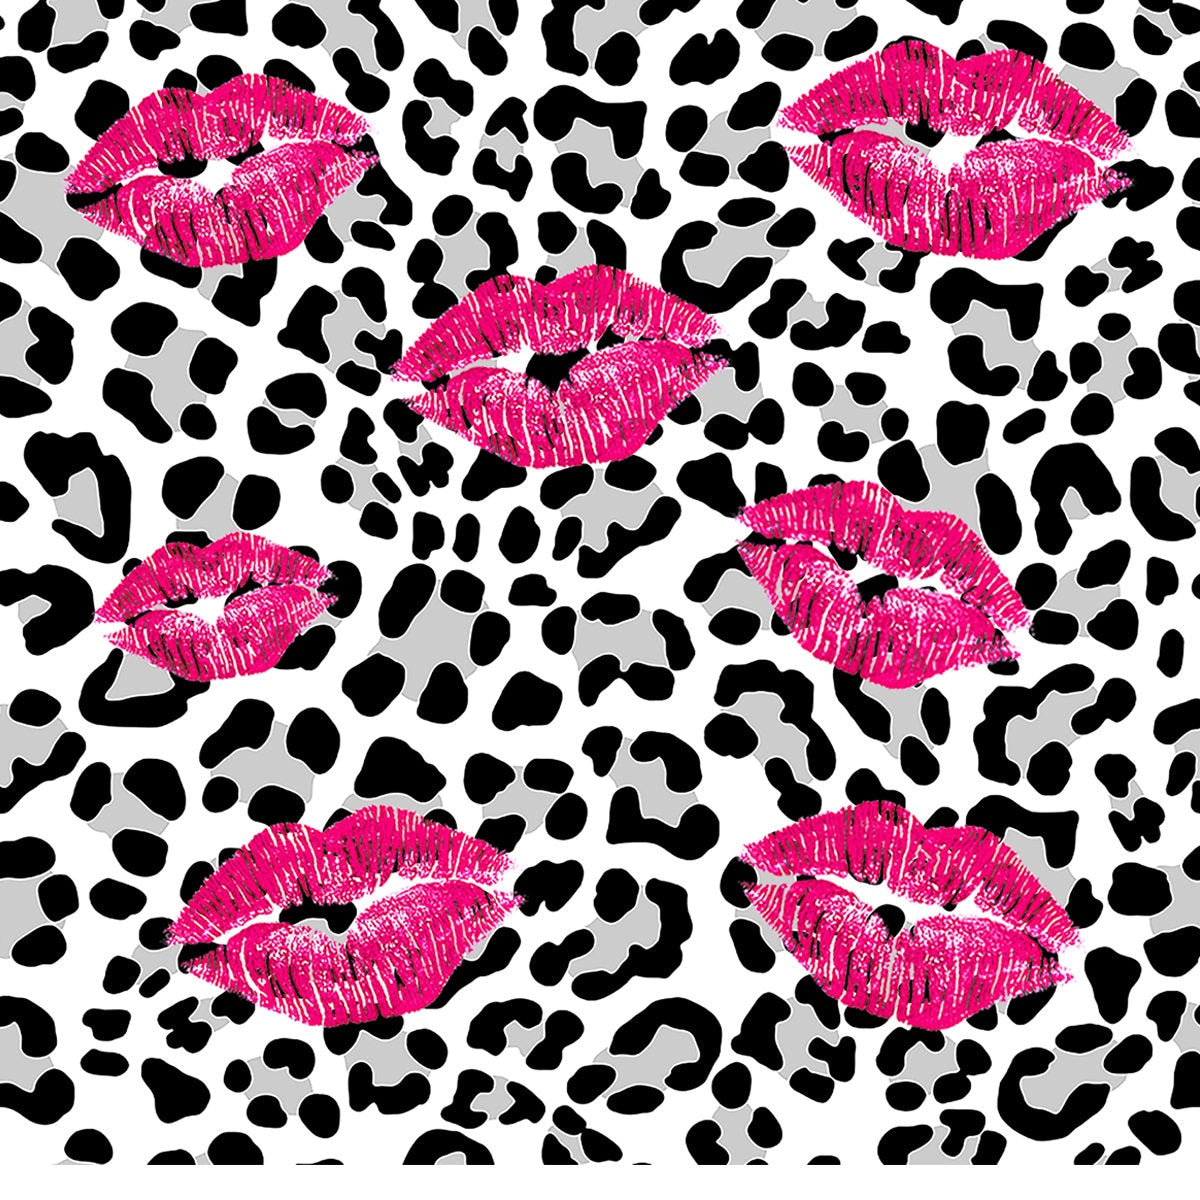 Black and Gray Leopard Print with Pink Kisses Wallpaper Teen Girl Bedroom Mural